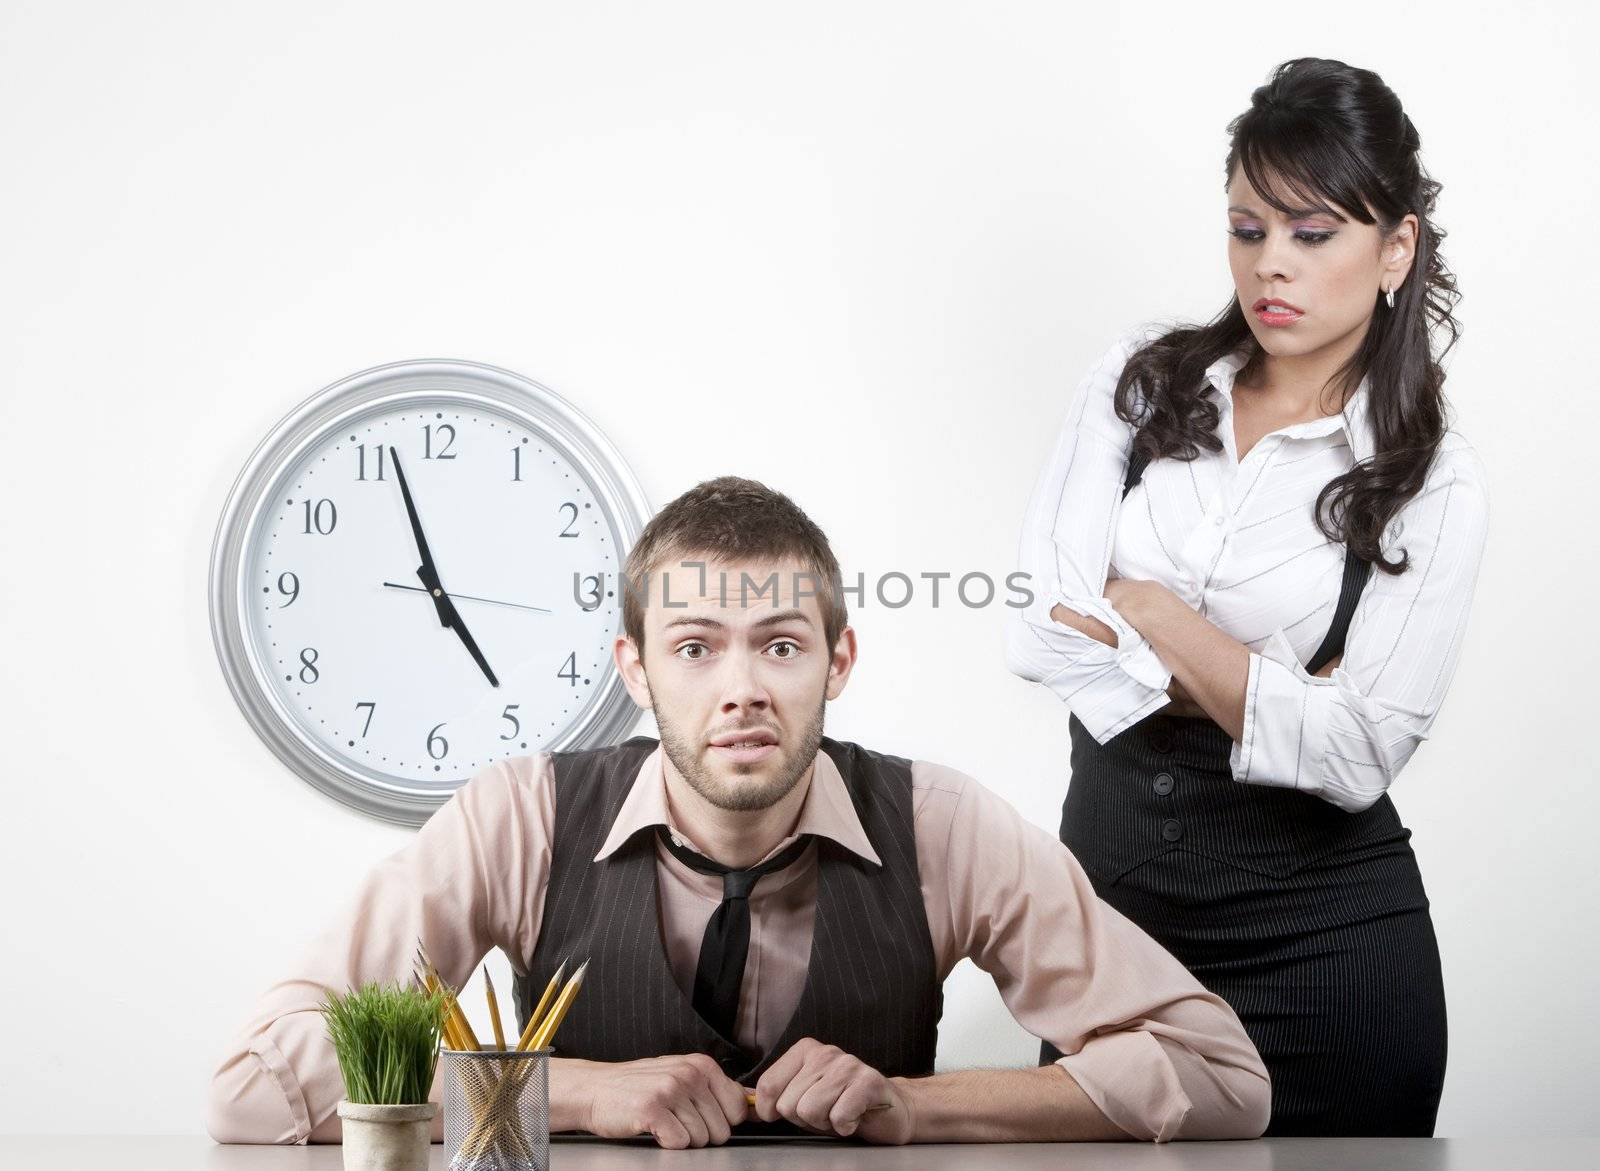 Woman at work wngry with male coworker